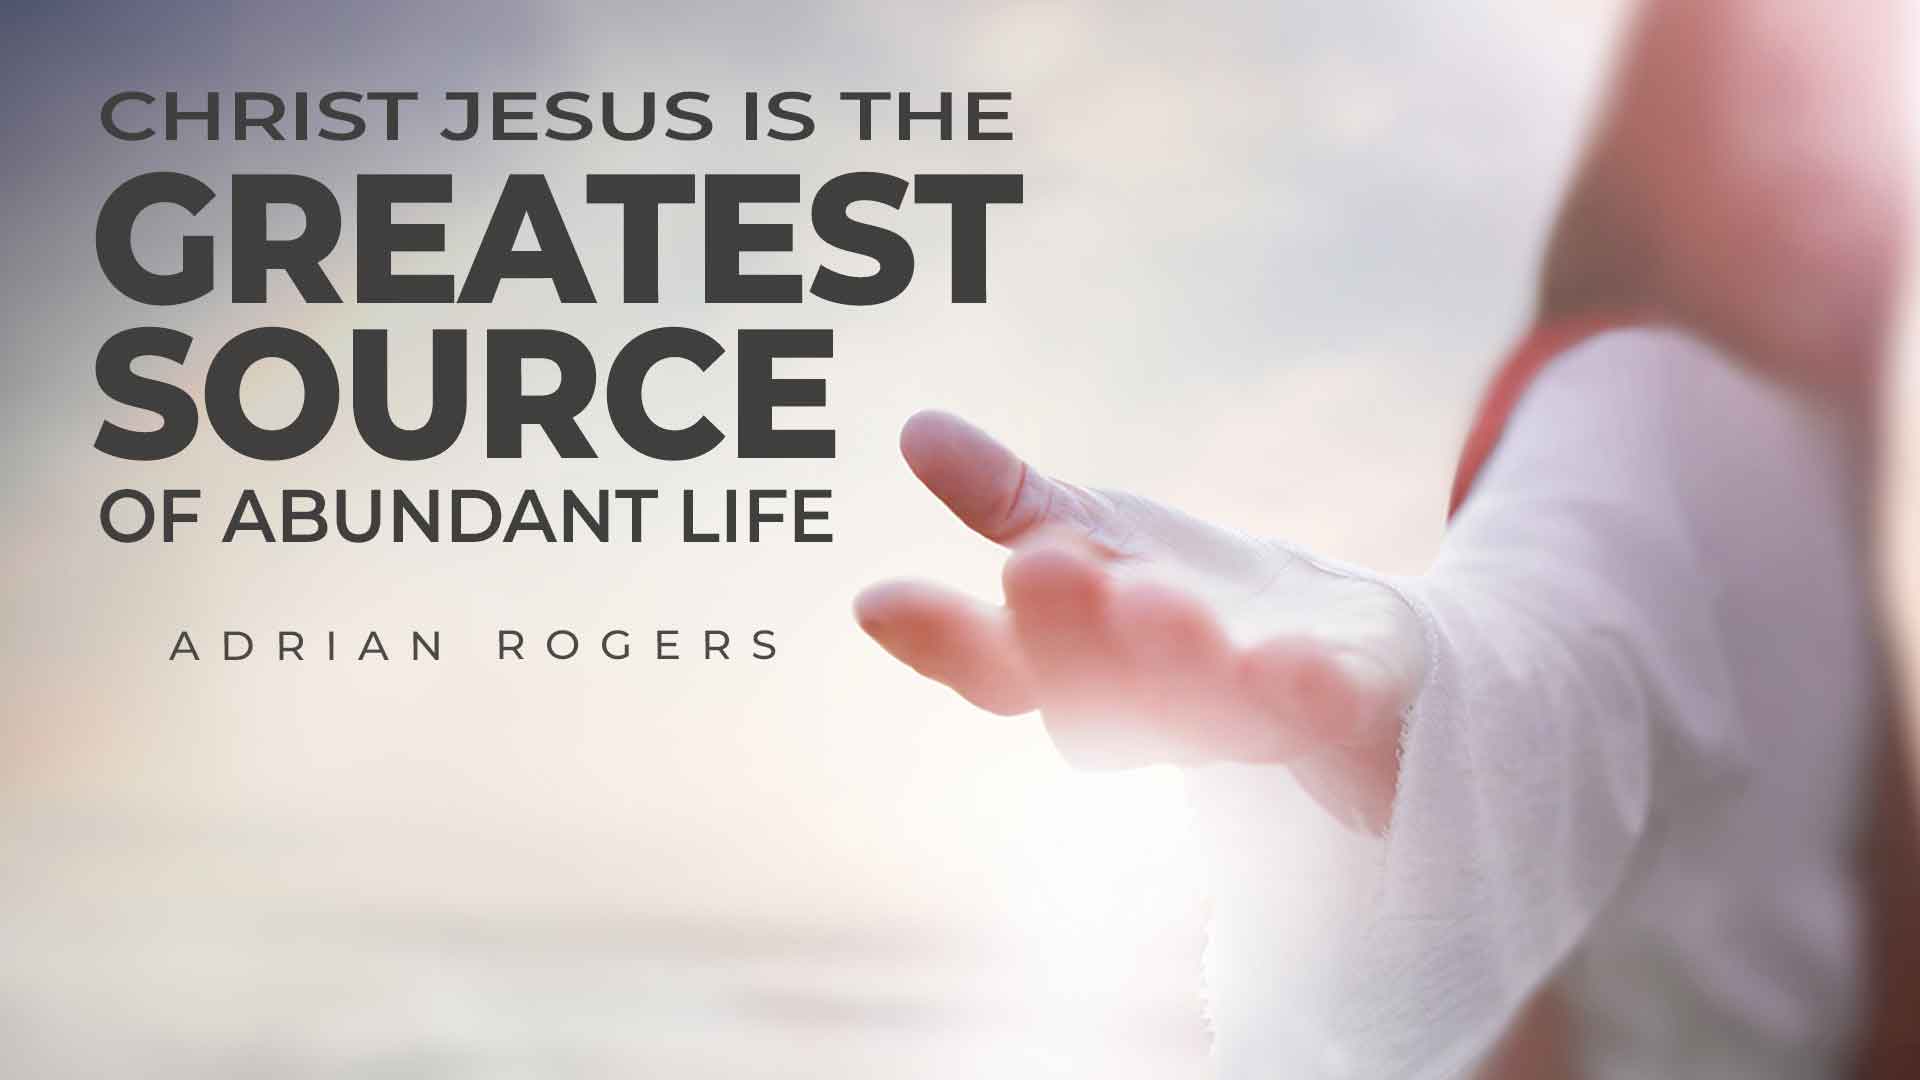 Christ Jesus is the Greatest Source for Abundant Life 1920x1080